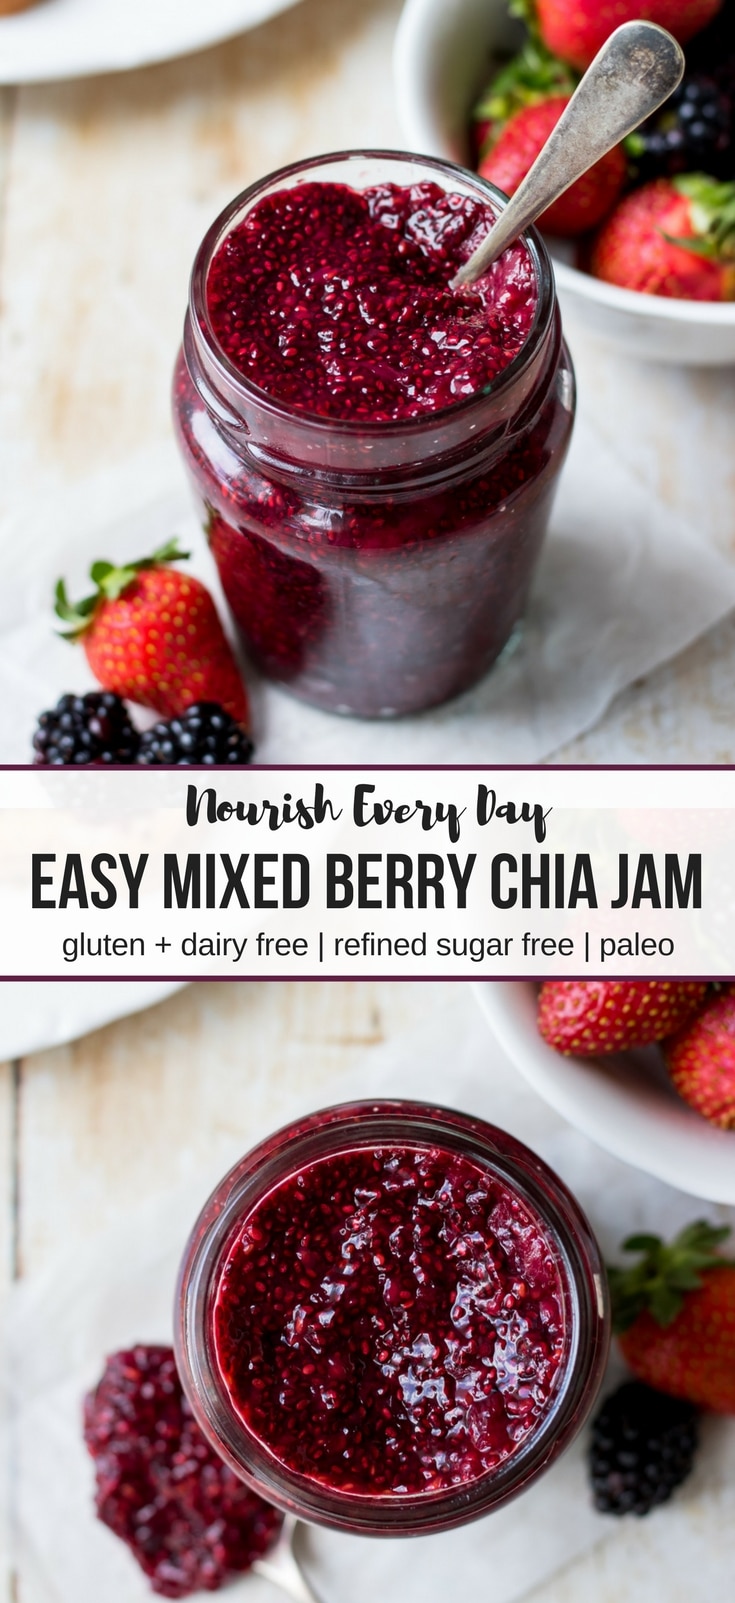 Pinterest graphic for easy mixed berry chia jam recipe by Nourish Every Day